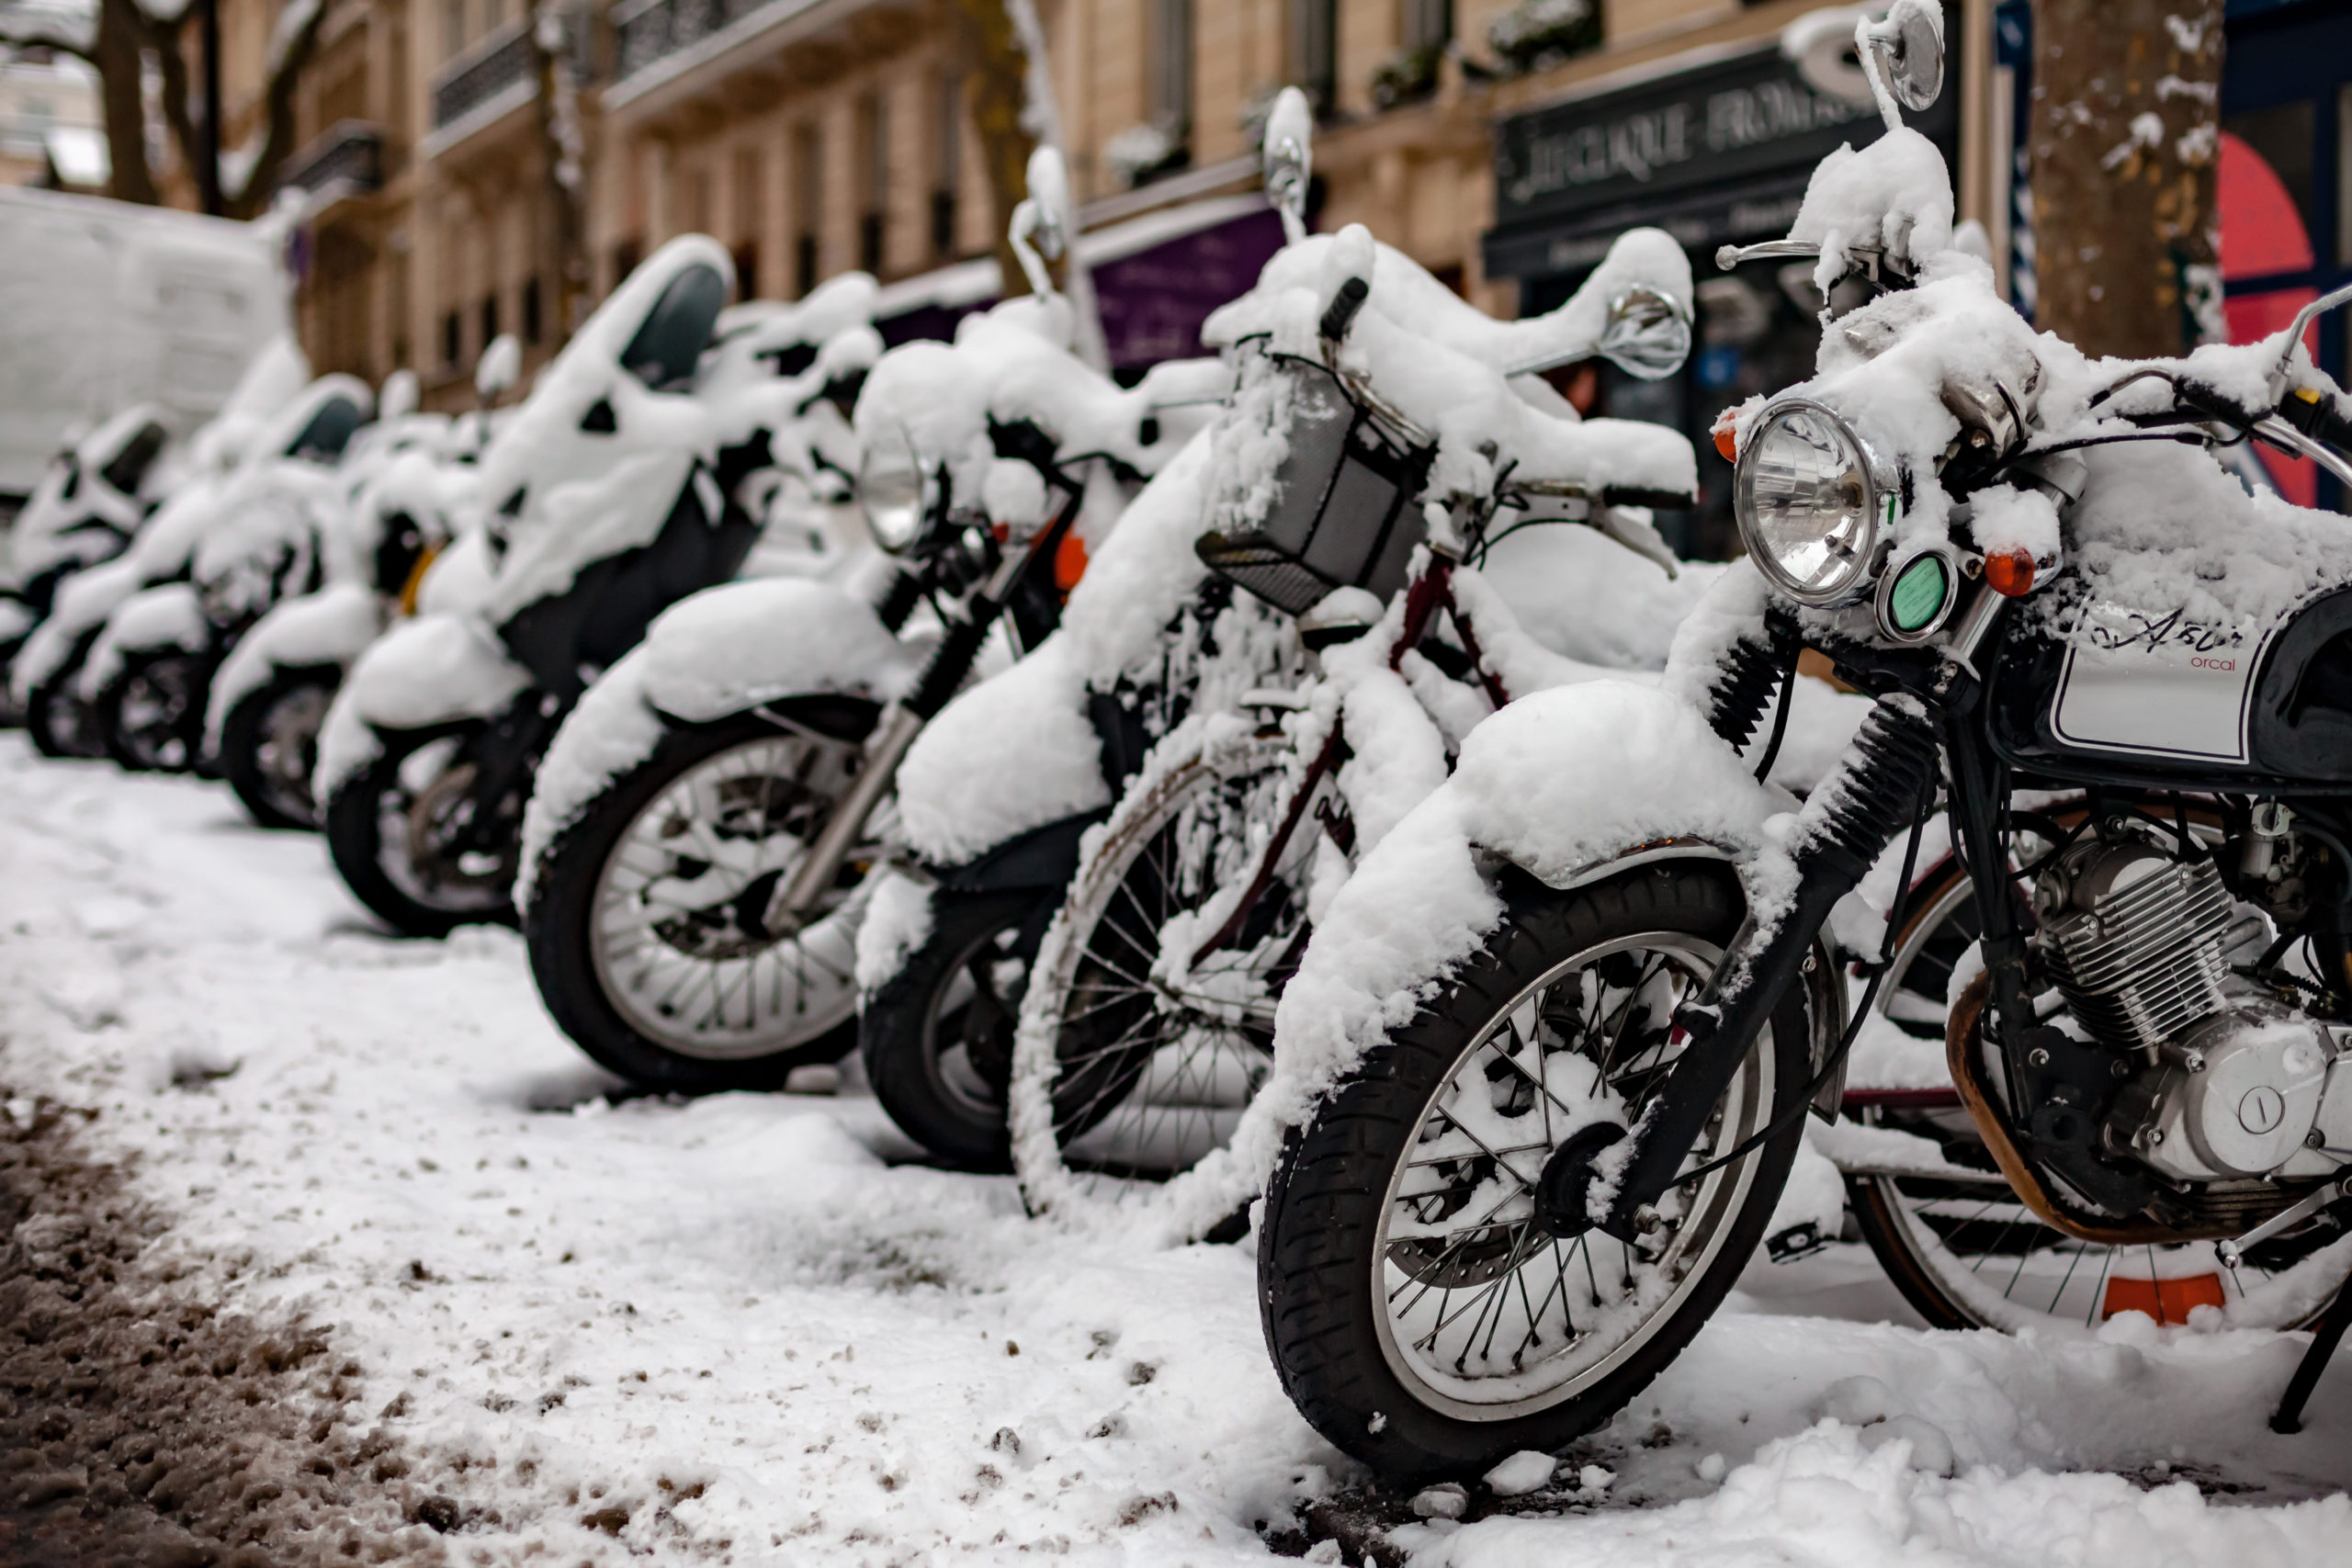 Row of snow-covered motorcycles parked outside a winter business